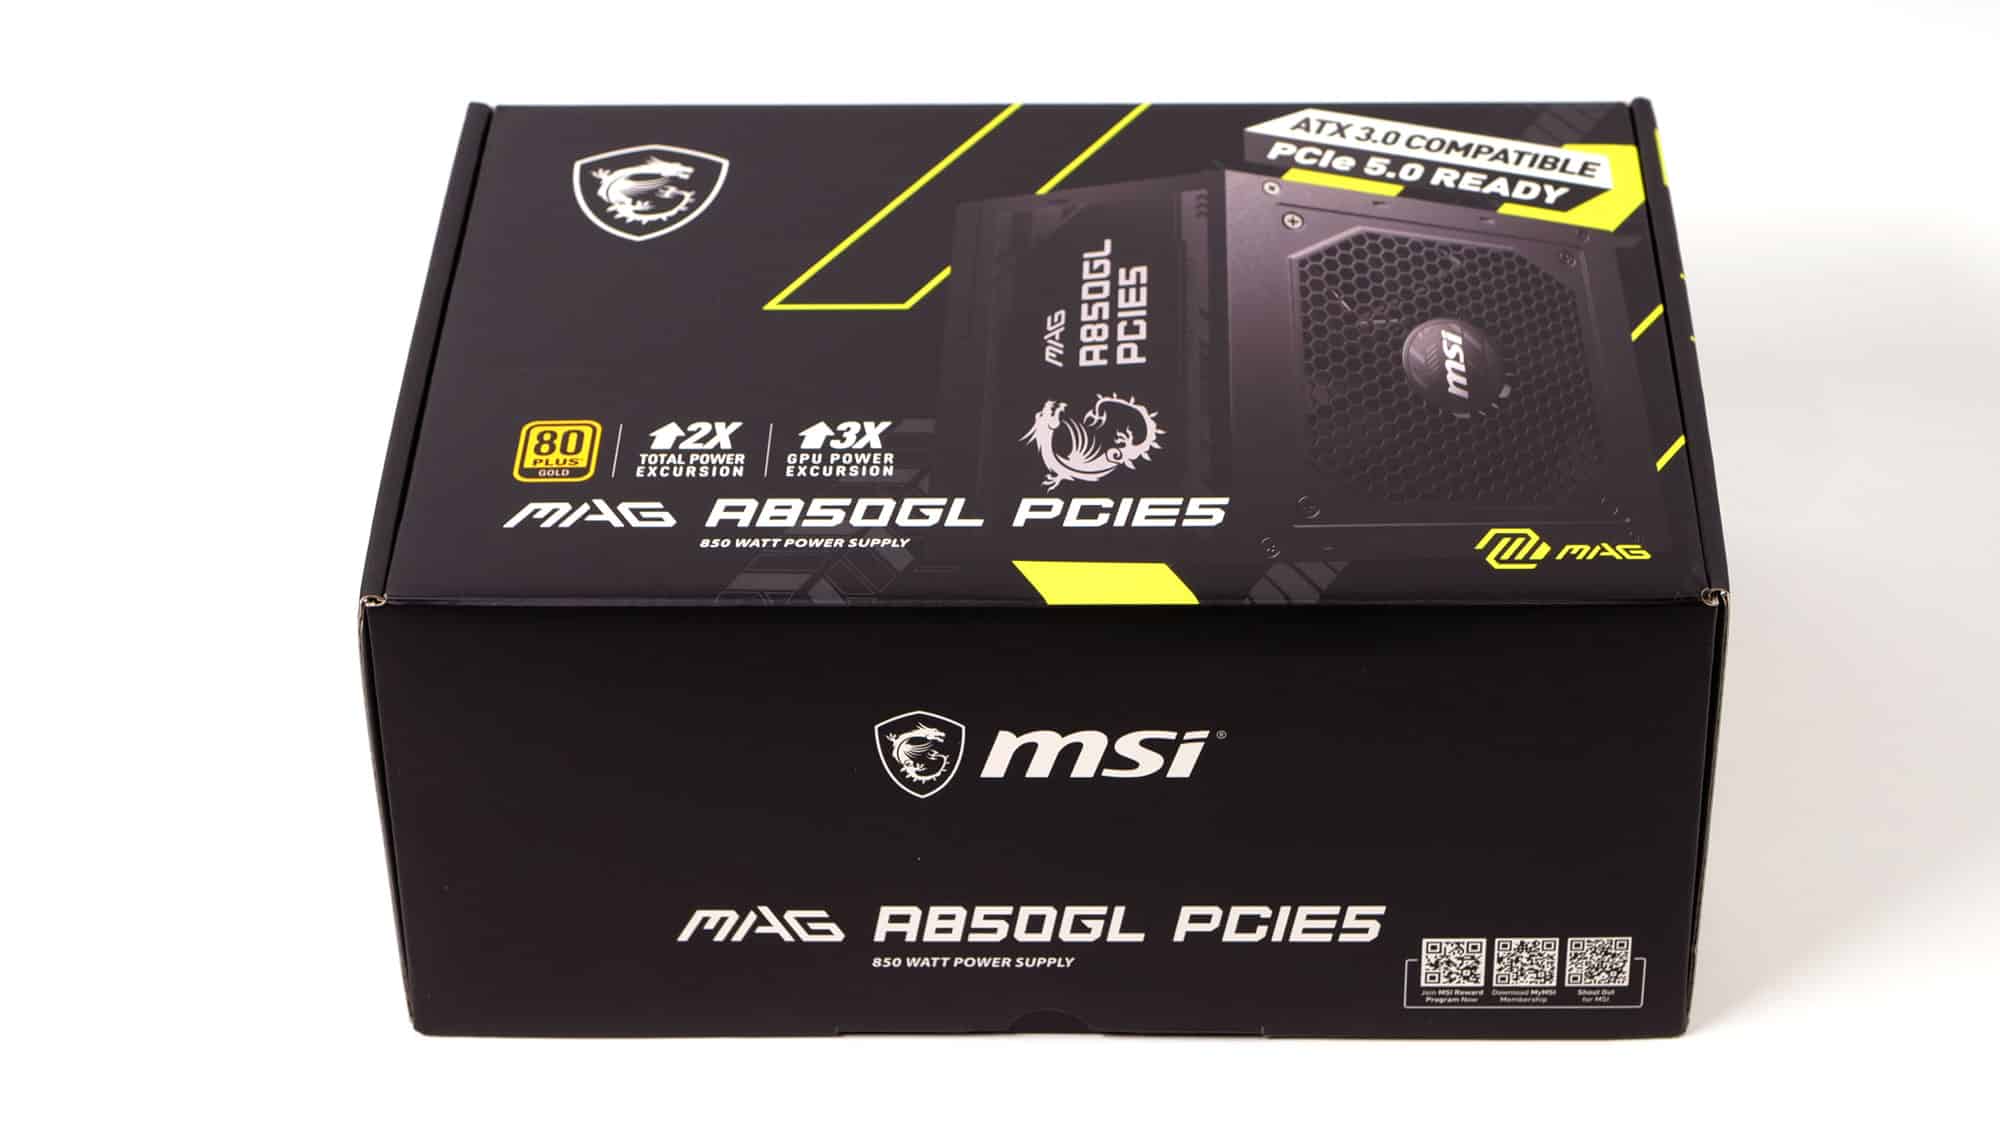 MSI MAG A850GL PCIE5 Power Supply Unit Review